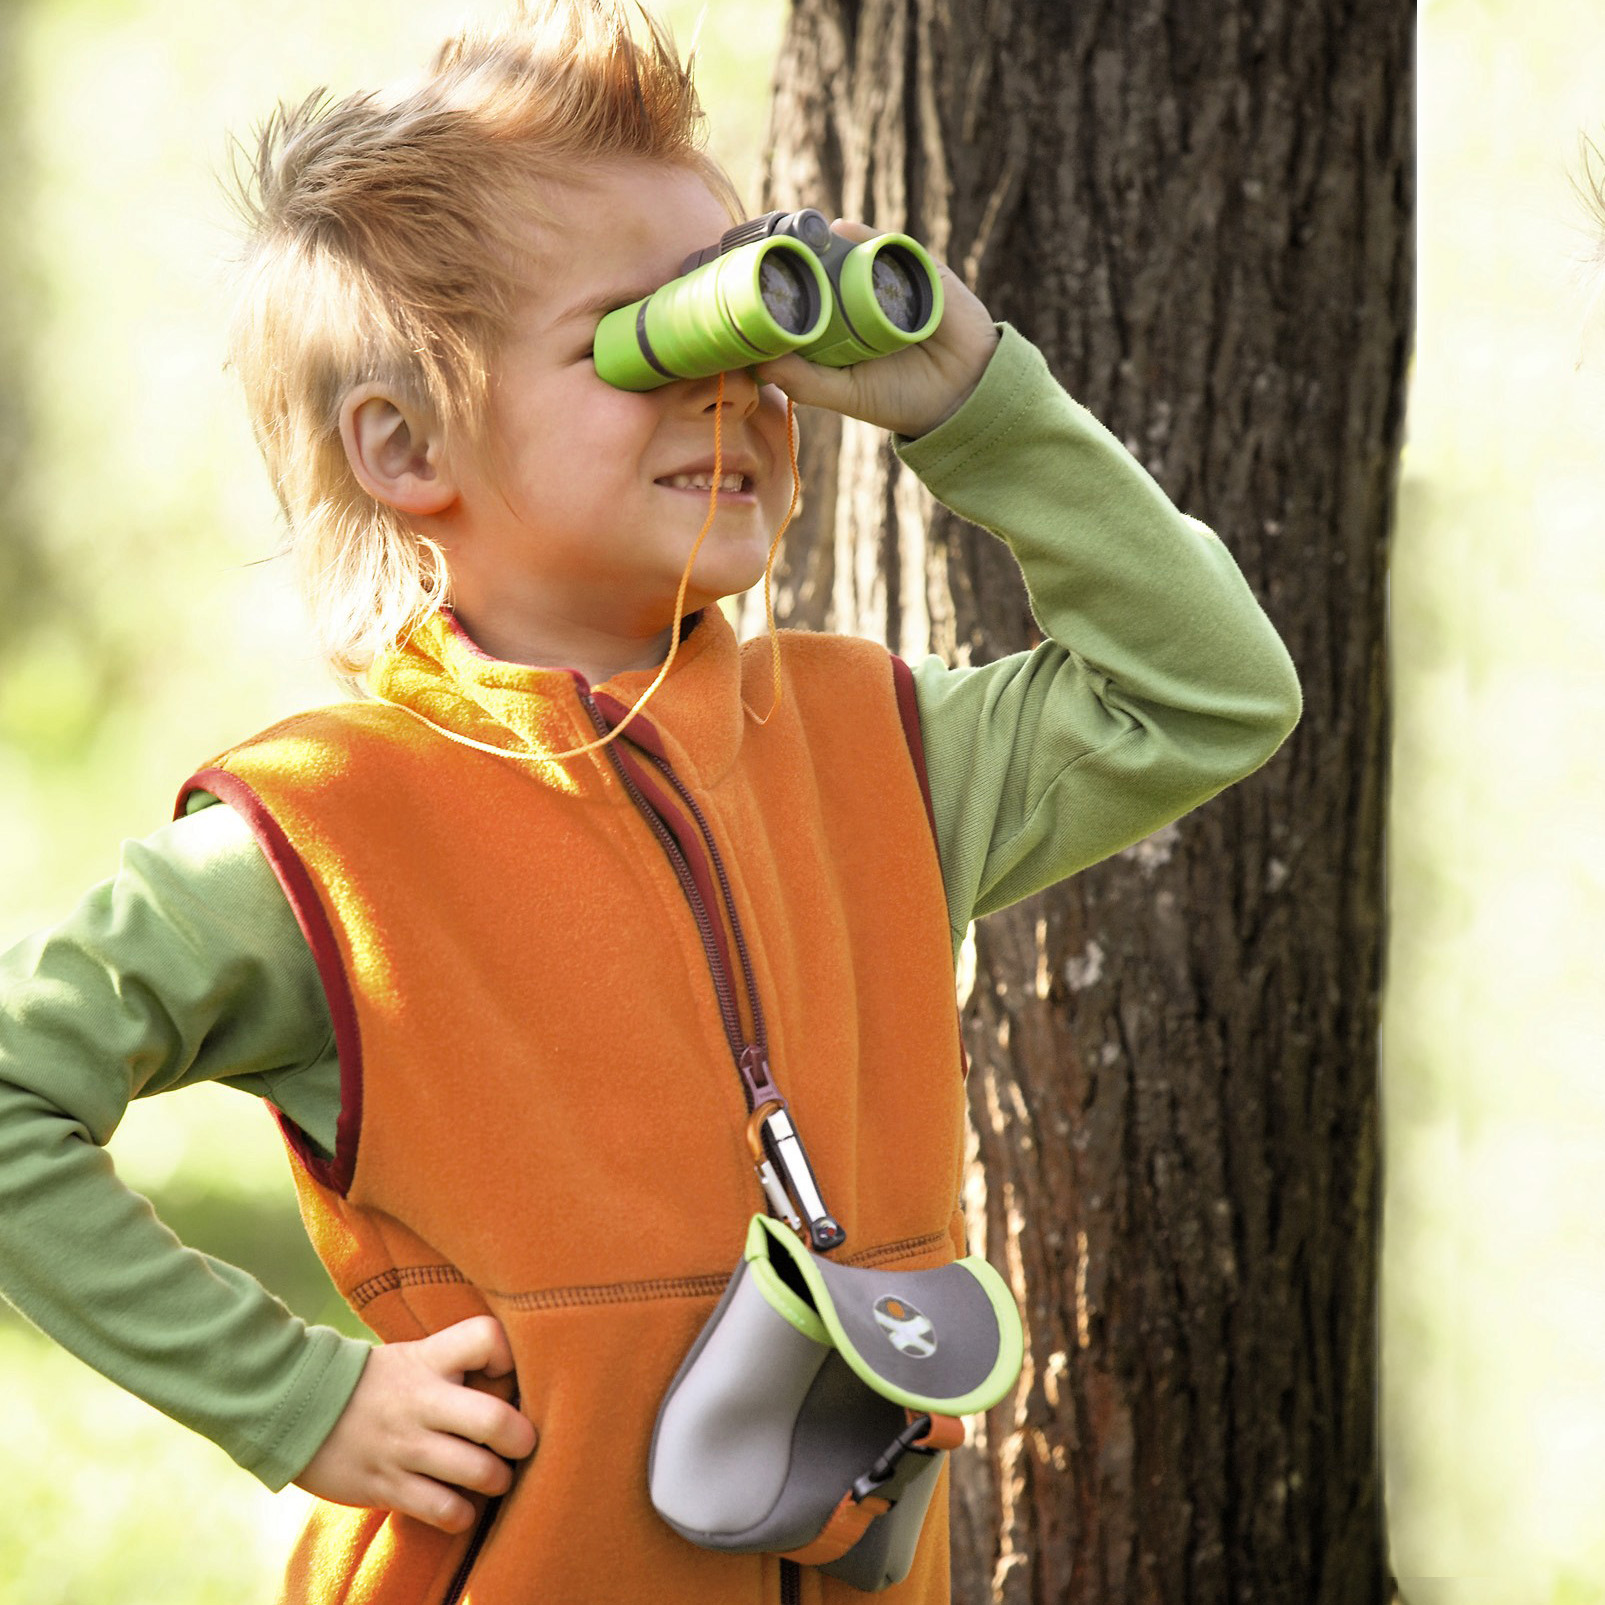 HABA Terra Kids Children's Binoculars - Hiking, Camping, Fishing, Ball games - 4x30 Magnification with Compact Case - image 2 of 8